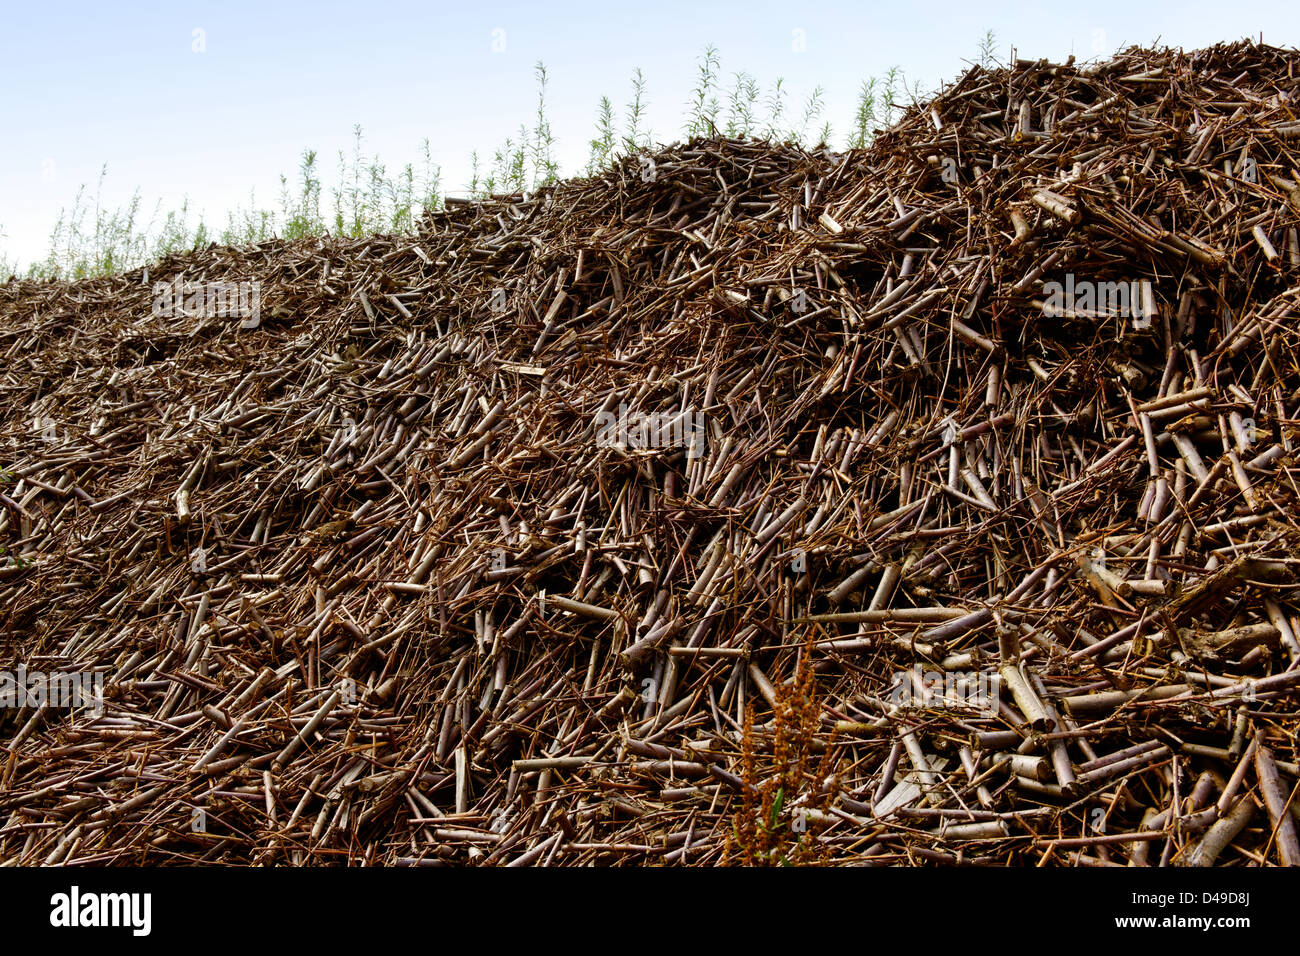 Pile of willow biomass fuel, UK Stock Photo